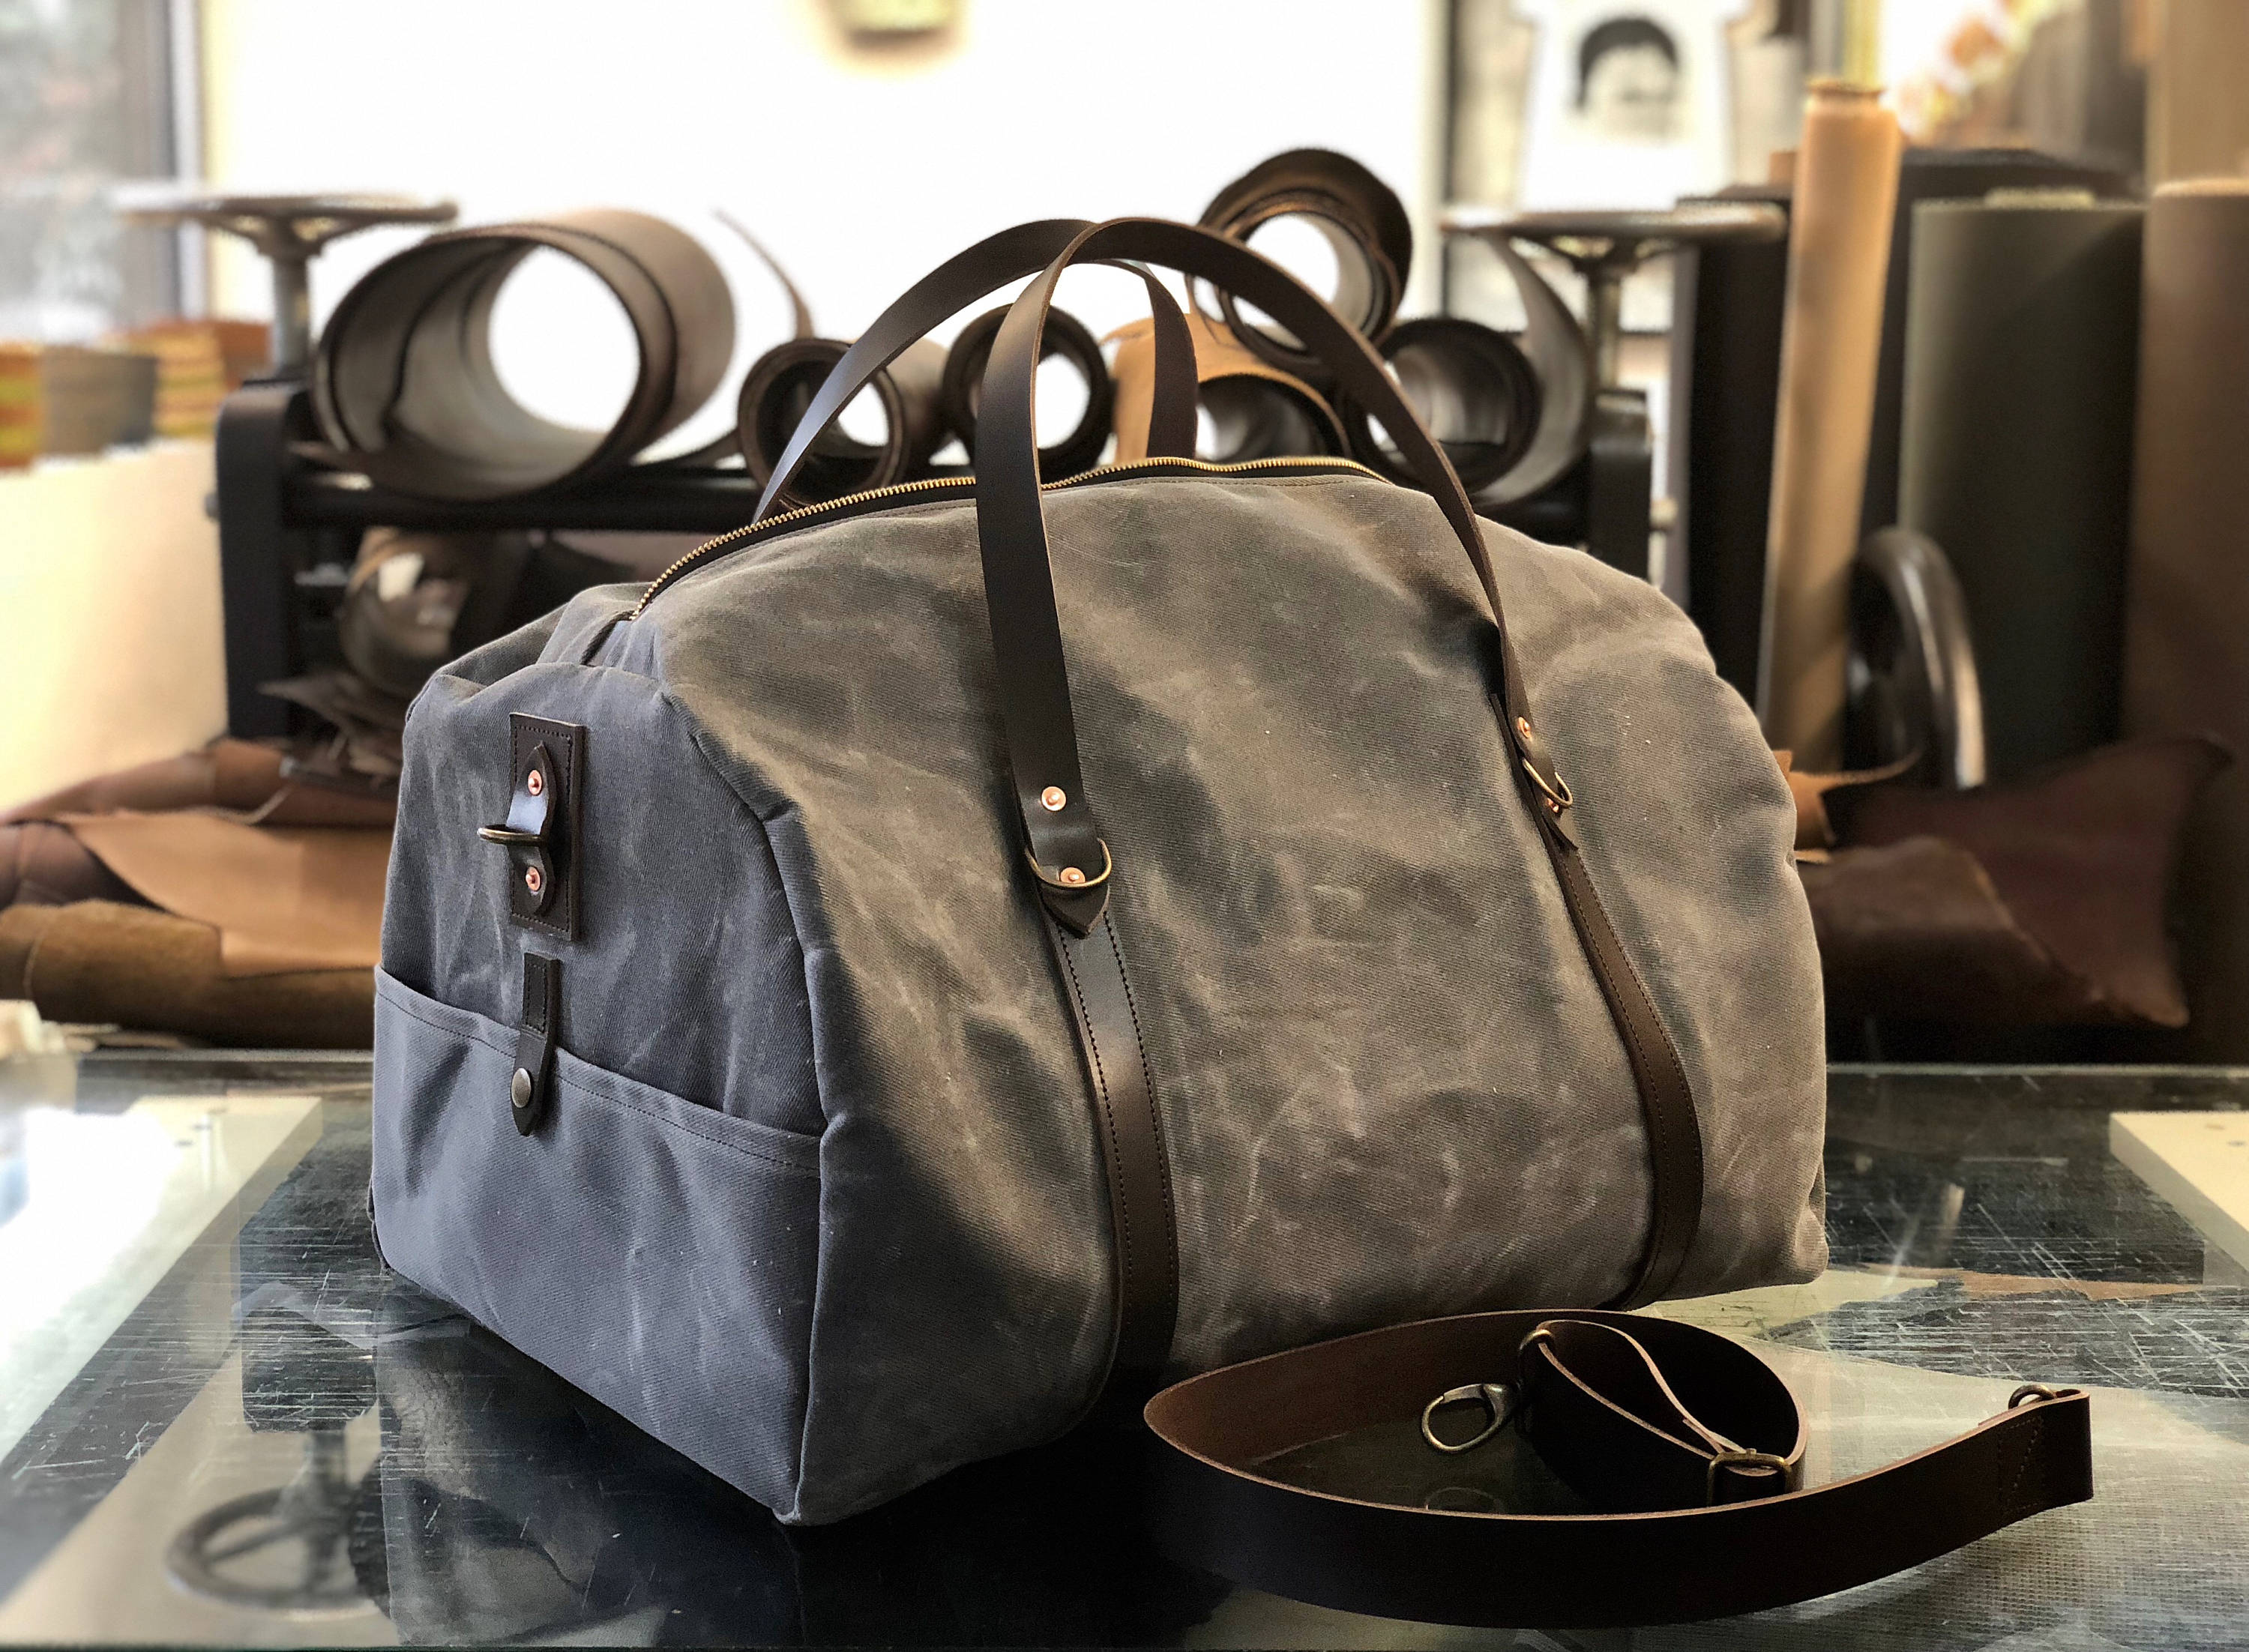 Classic Duffel Bag in Canvas with Colombian Leather Trim